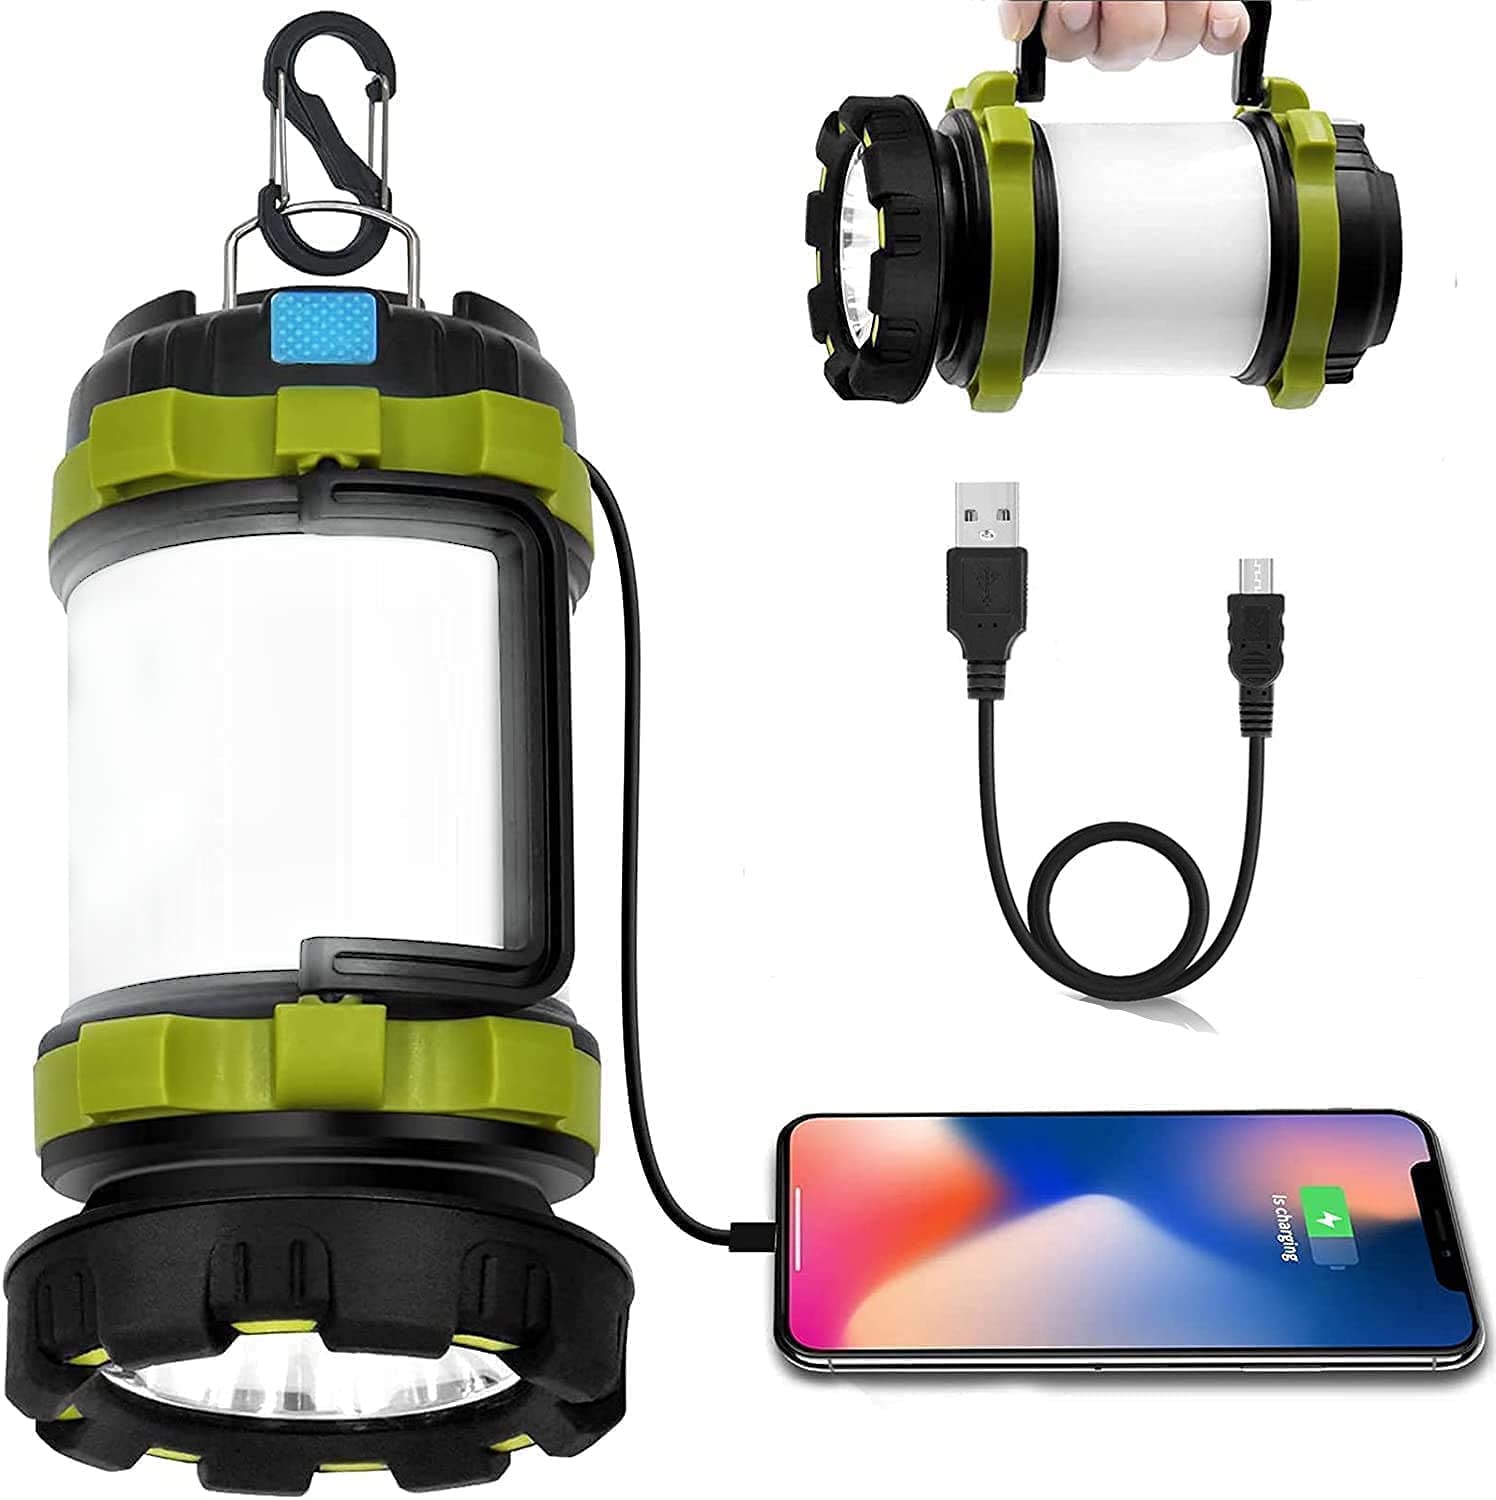 Bring four highly-rated Etekcity lanterns to the camp site for $21.50 Prime  shipped (Reg. $27+)